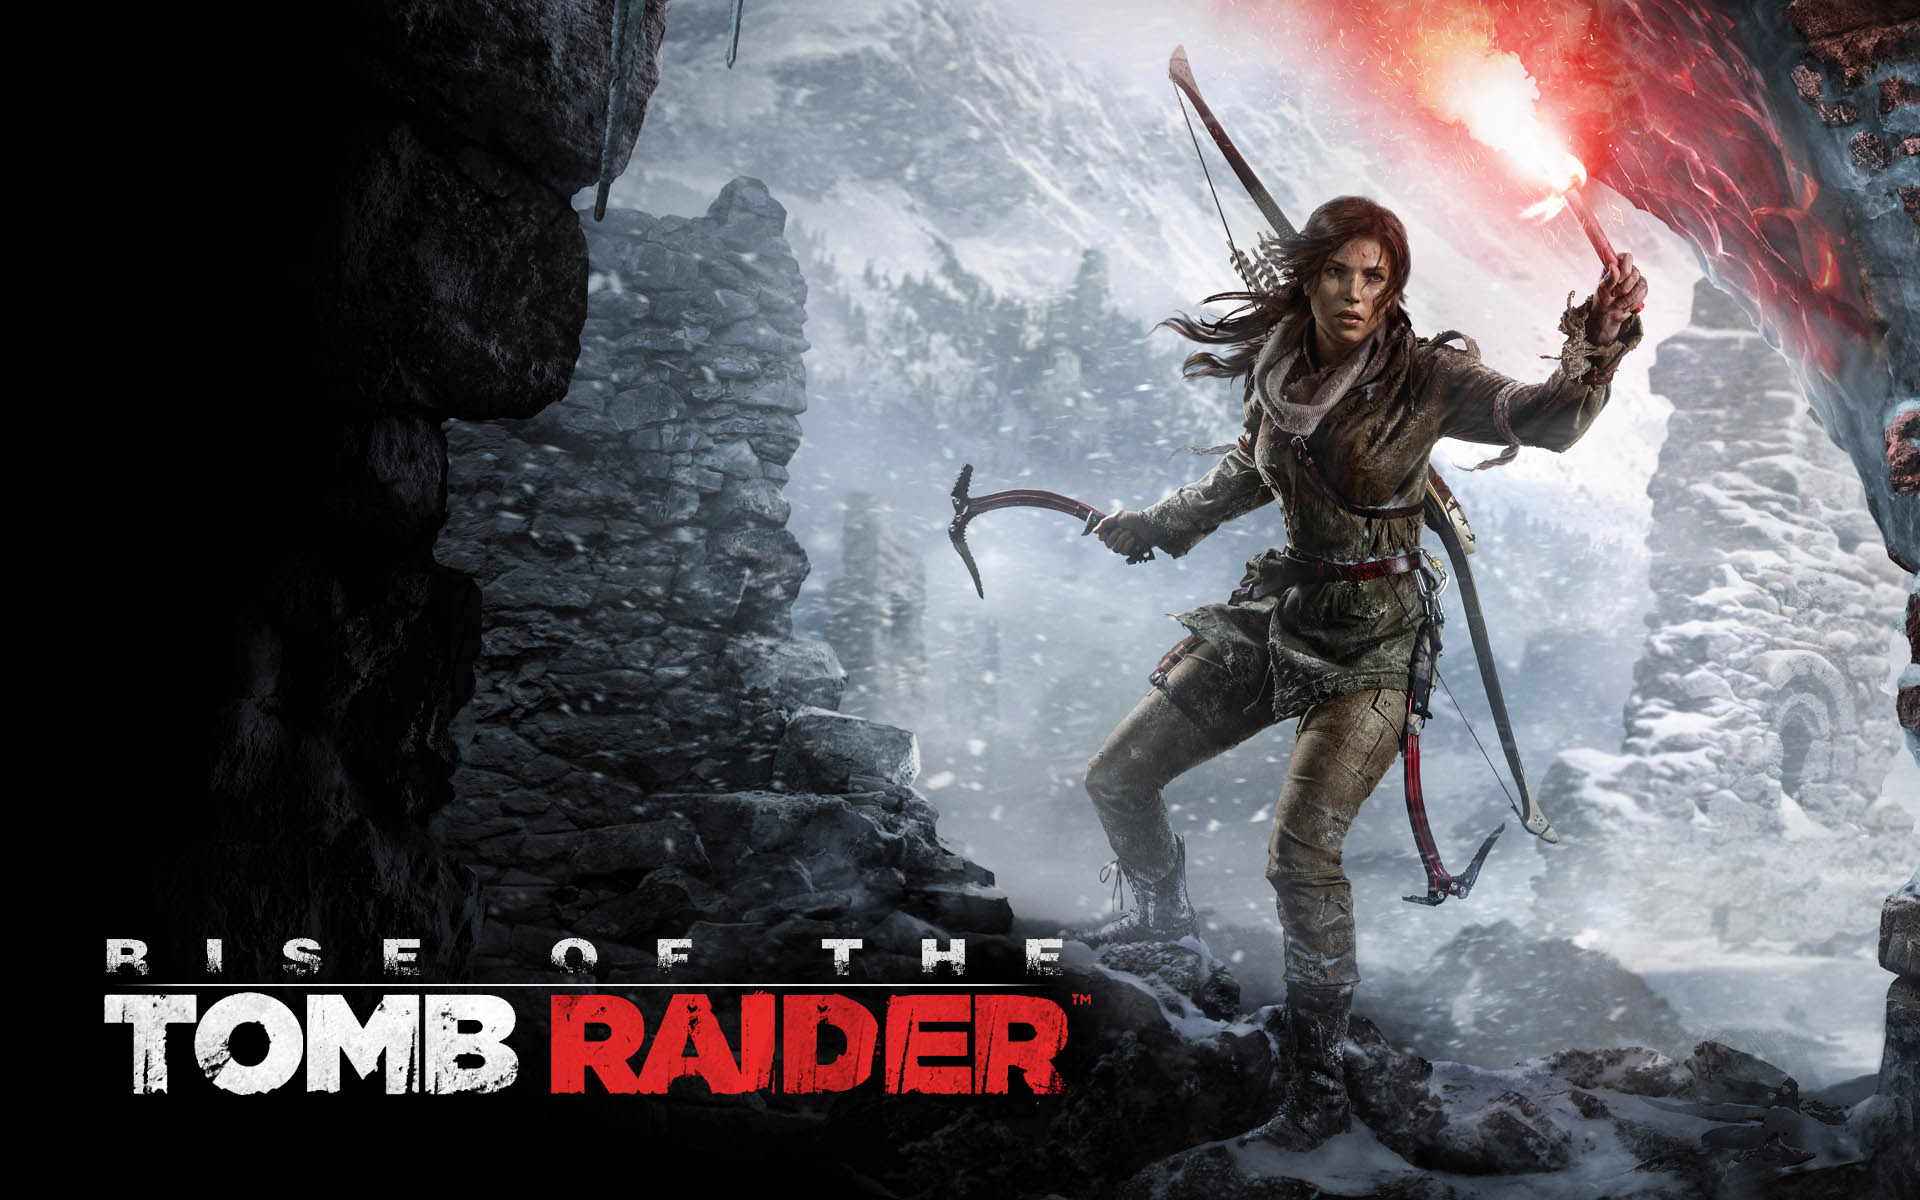 CHSR-FM 97.9 | Rise of the Tomb Raider ReviewRise of the Tomb Raider Review  - CHSR-FM 97.9